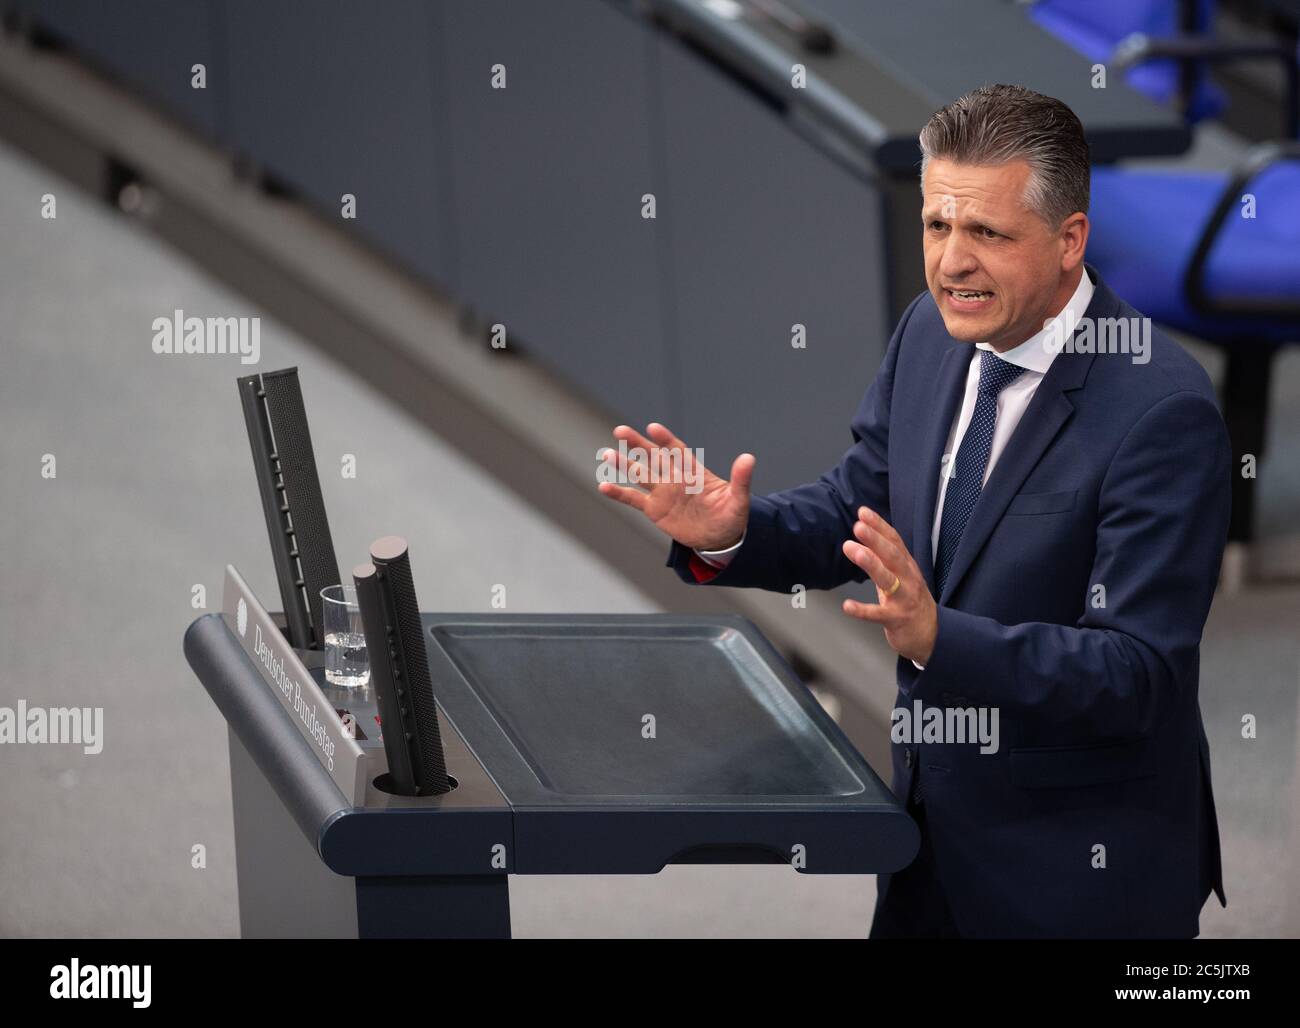 Berlin, Germany. 03rd July, 2020. Thorsten Frei (CDU) speaks in the plenary session of the German Bundestag. The main topics of the 171st session of the 19th legislative period are the adoption of the Coal Exit Act, a topical hour on the excesses of violence in Stuttgart, as well as debates on electoral law reform, the protection of electronic patient data, the welfare of farm animals and the German chairmanship of the UN Security Council. Credit: Christophe Gateau/dpa/Alamy Live News Stock Photo